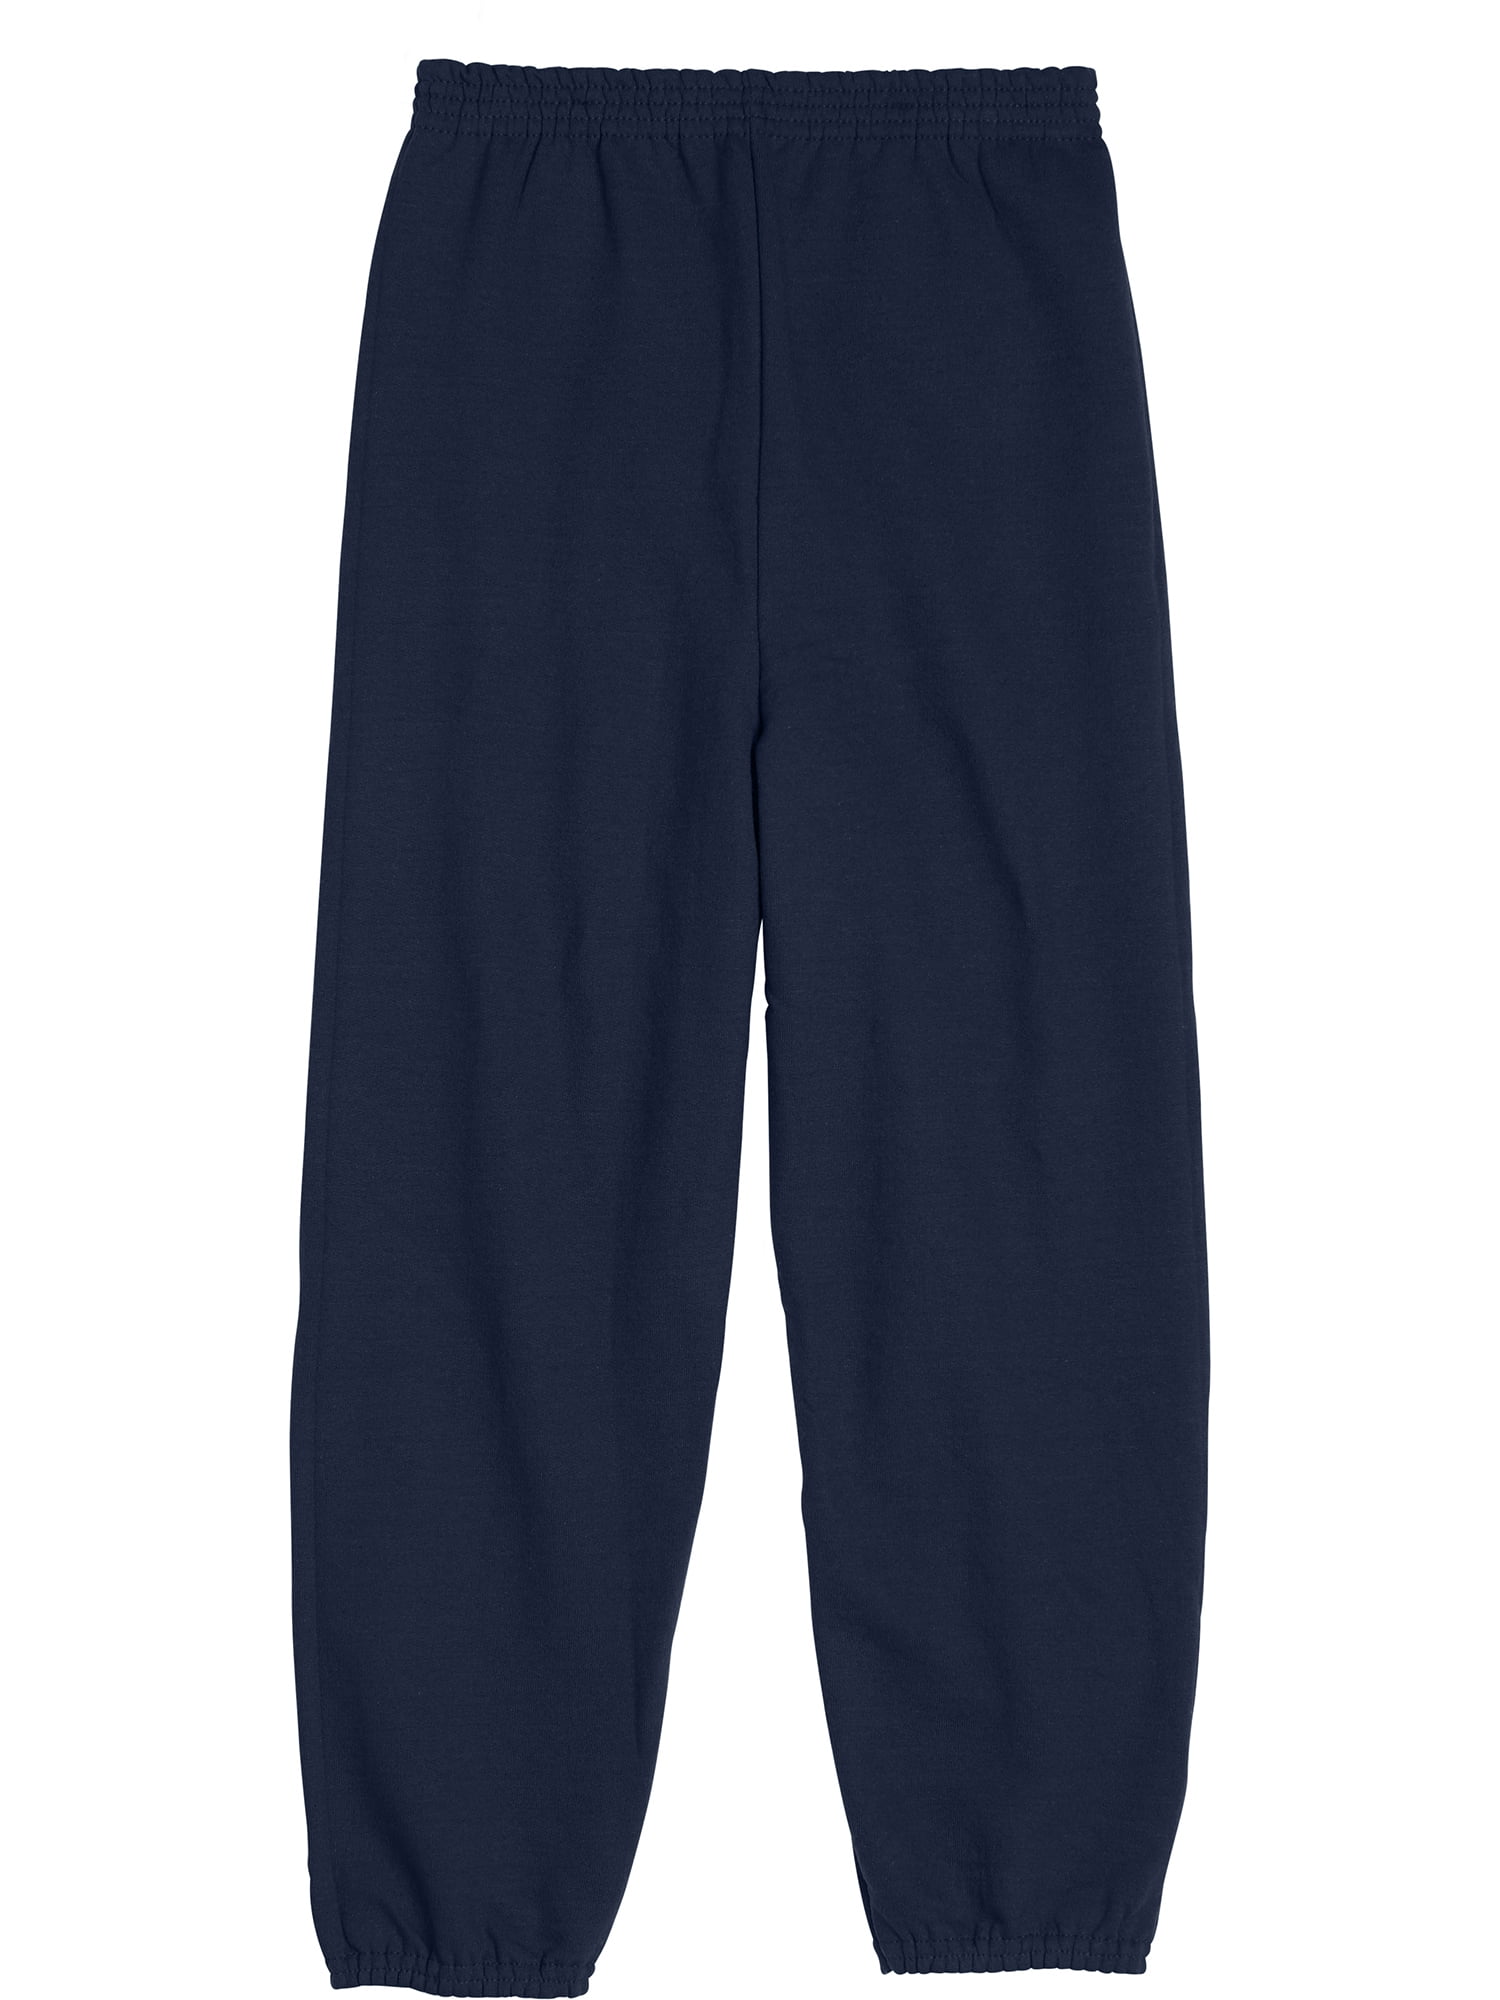 Hanes Sweatpants Are on Sale for as Little as $10 at